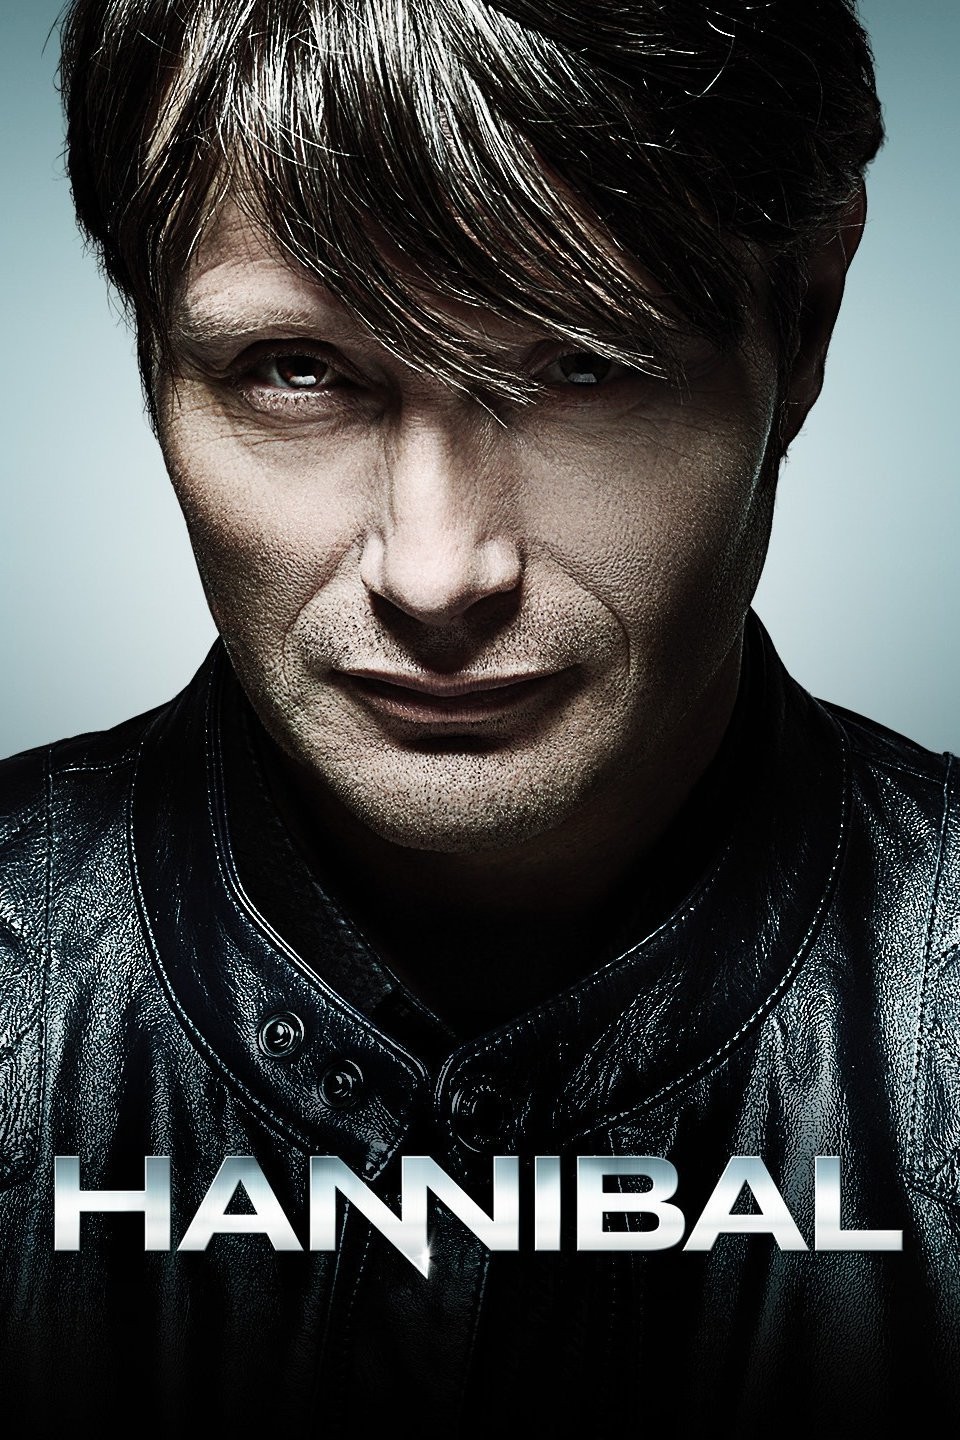 Hannibal - Watch Free on Pluto TV United States